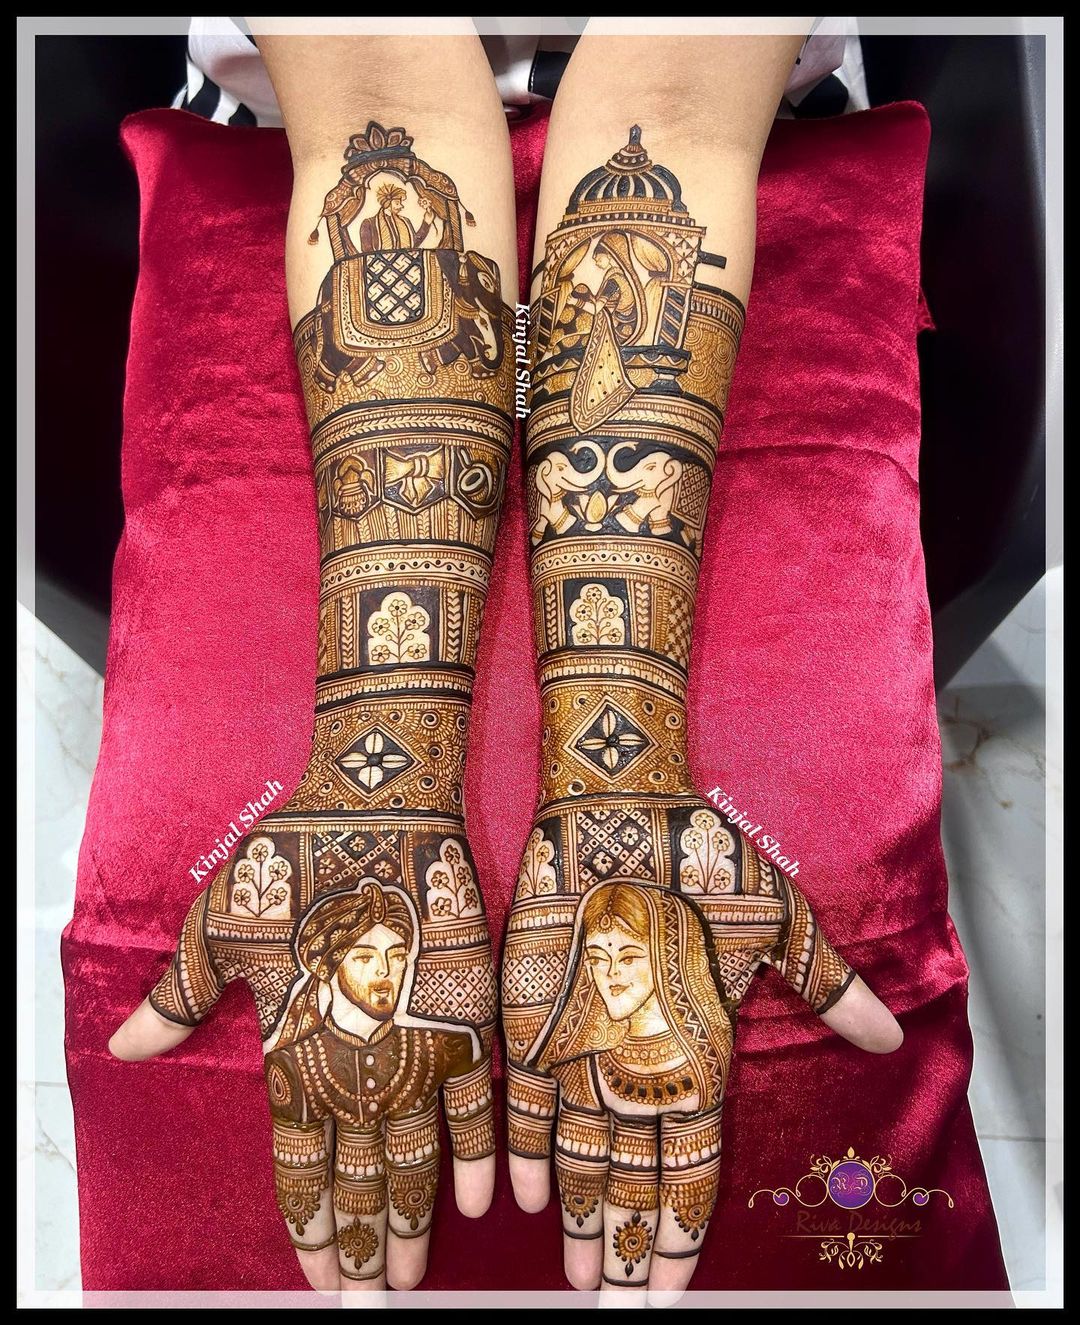 Mehndi designs 2022: Latest Mehndi designs for brides-to-be | Times Now